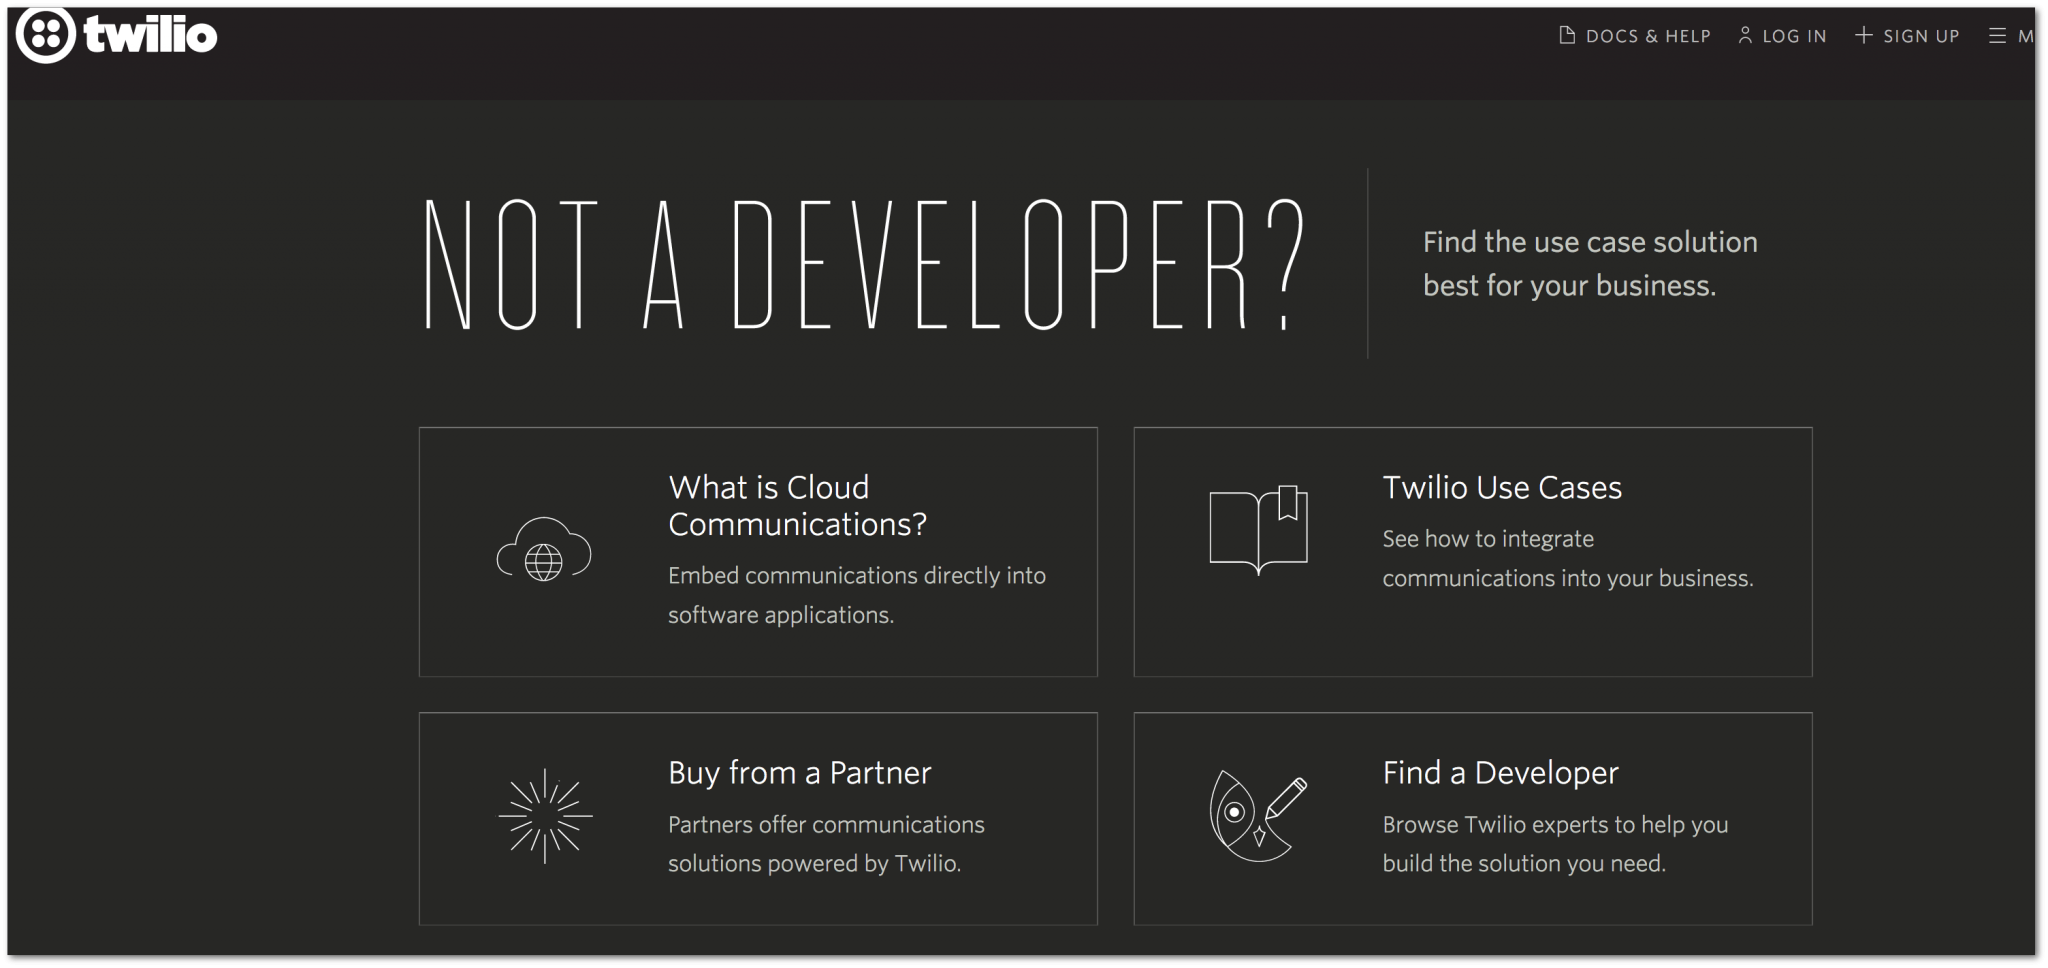 Twilio provides a Not a Developer? page. The listed use cases try to lead the visitor towards more and more specific and thus personalized descriptions, with journeys that could either end on the “Talk to Sales” page or on the developer documentation pages.